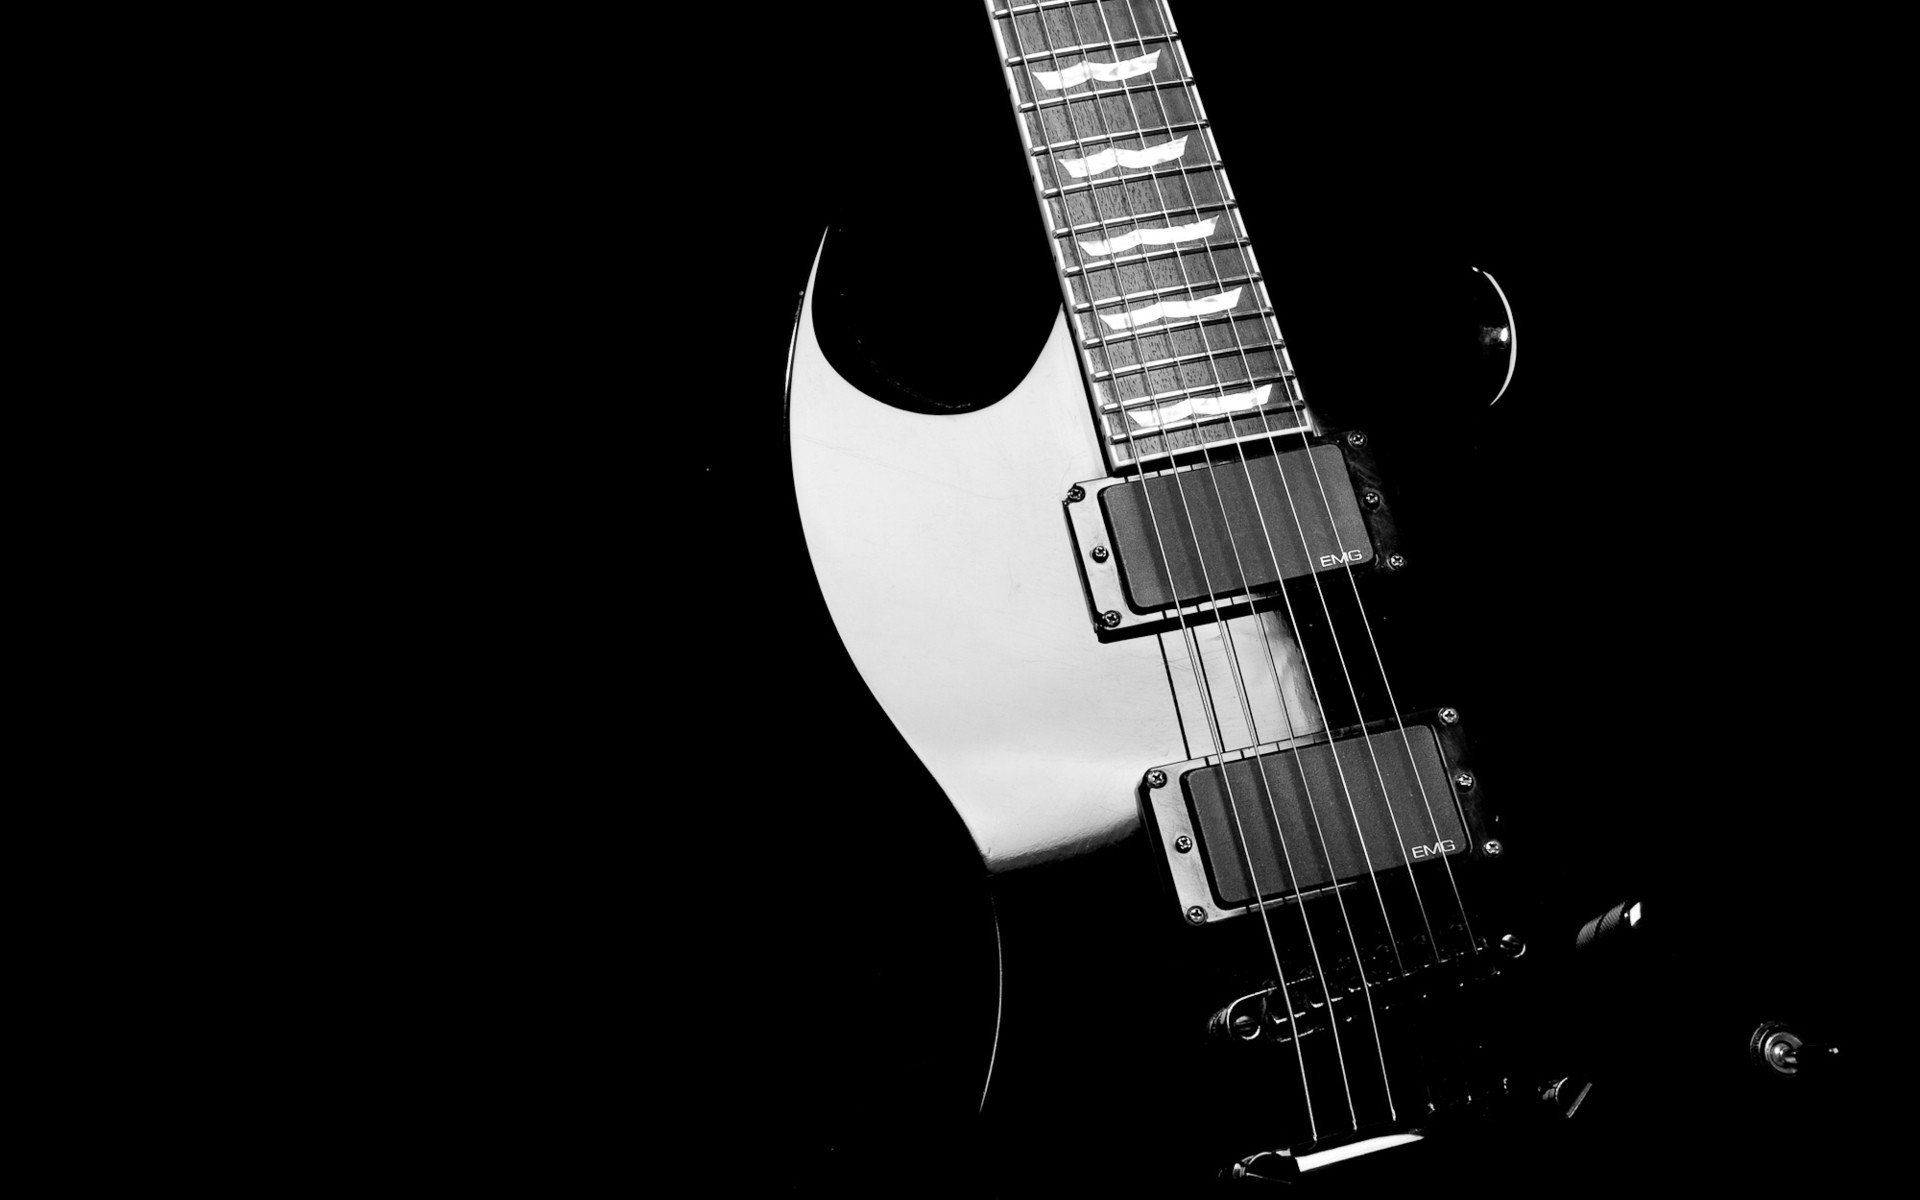 1920x1200 Guitar images Guitar HD wallpaper and background photos